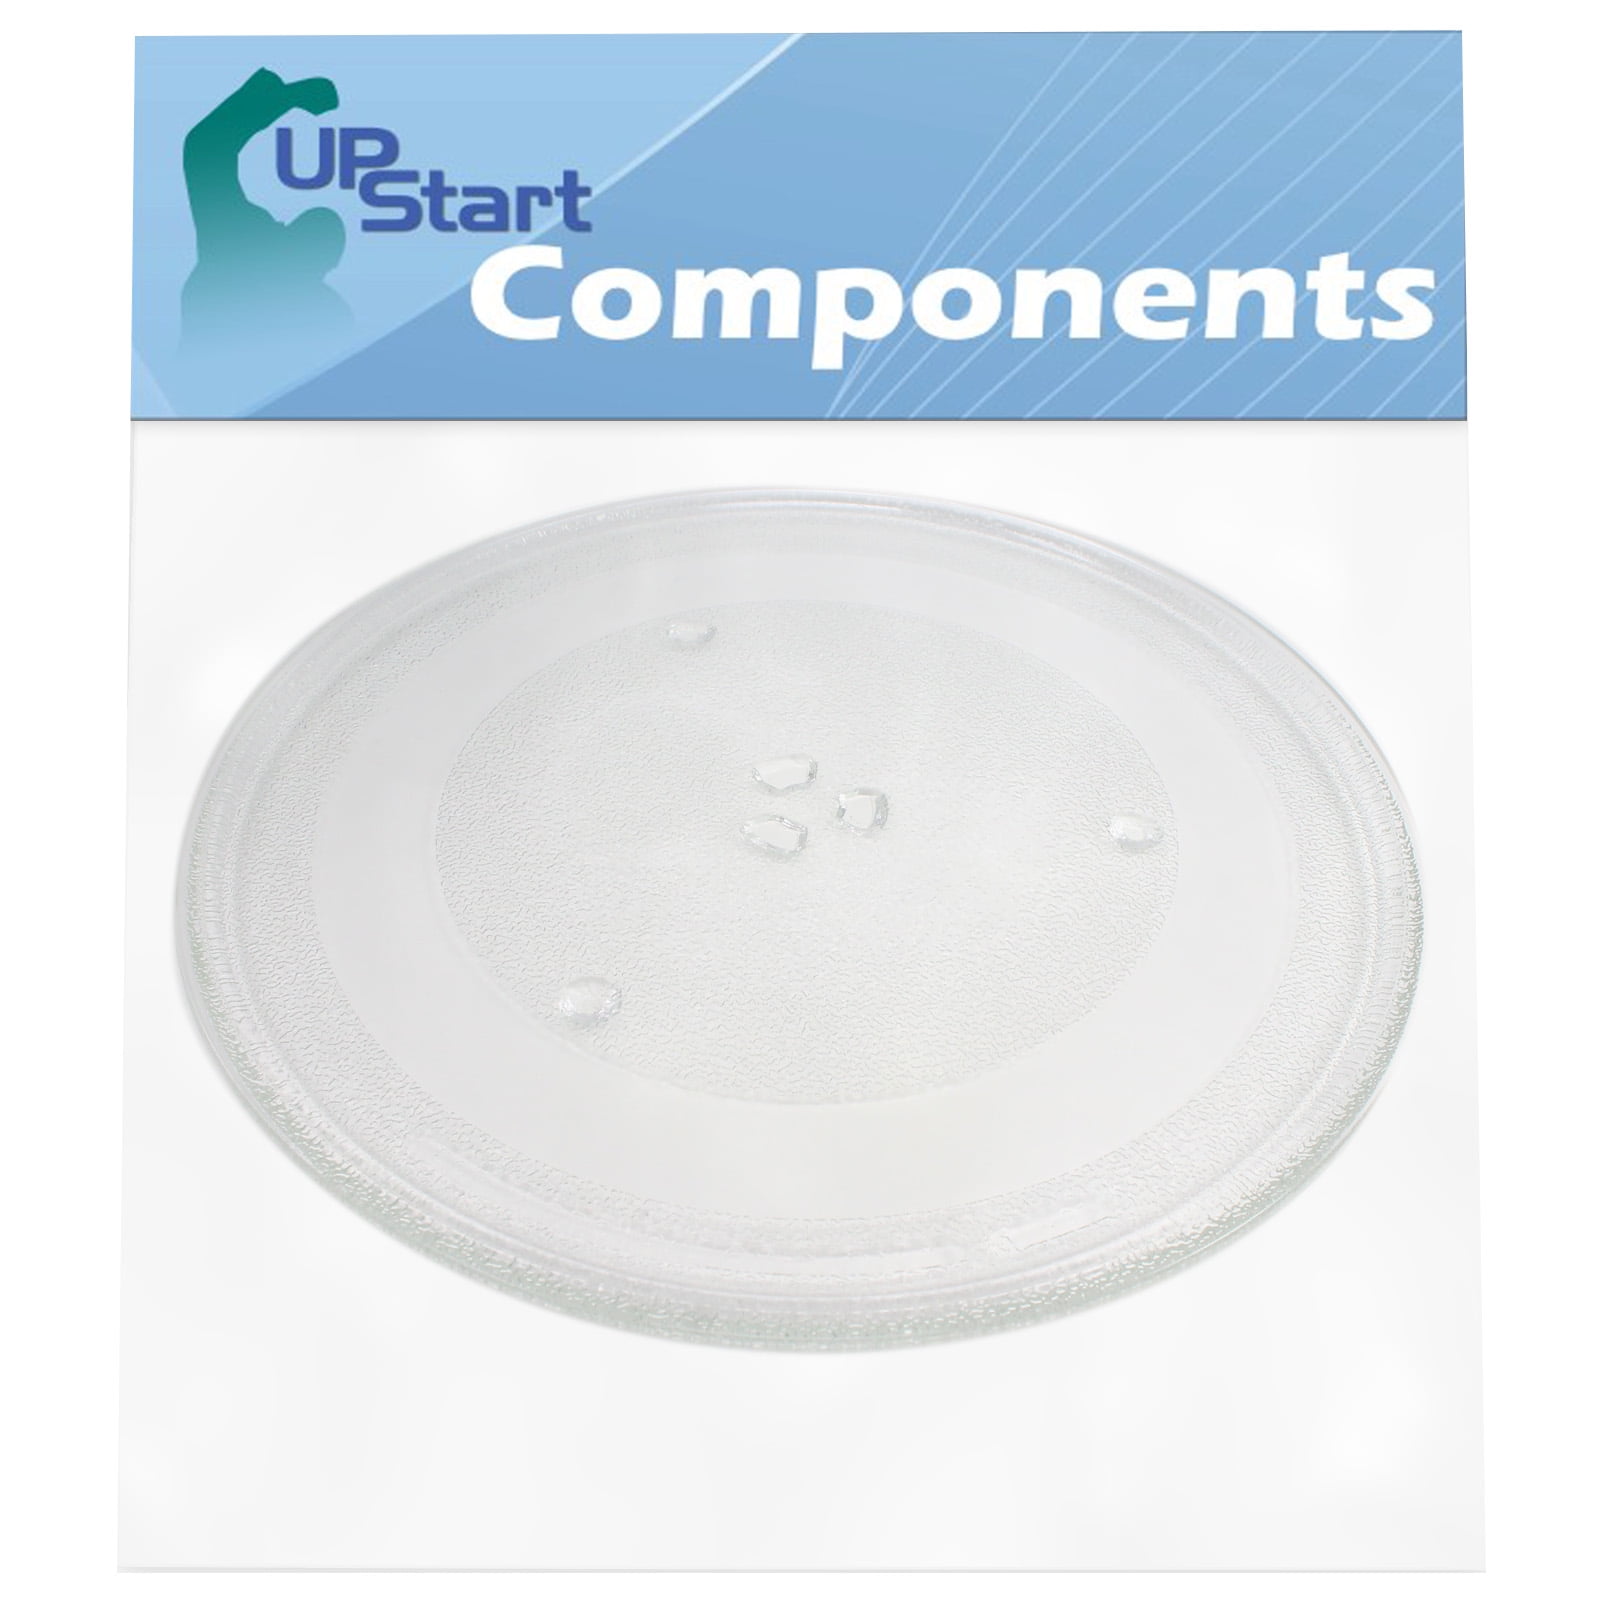 NEW 345mm Will Fit Several Models Microwave Turntable Glass Plate 13.5" 